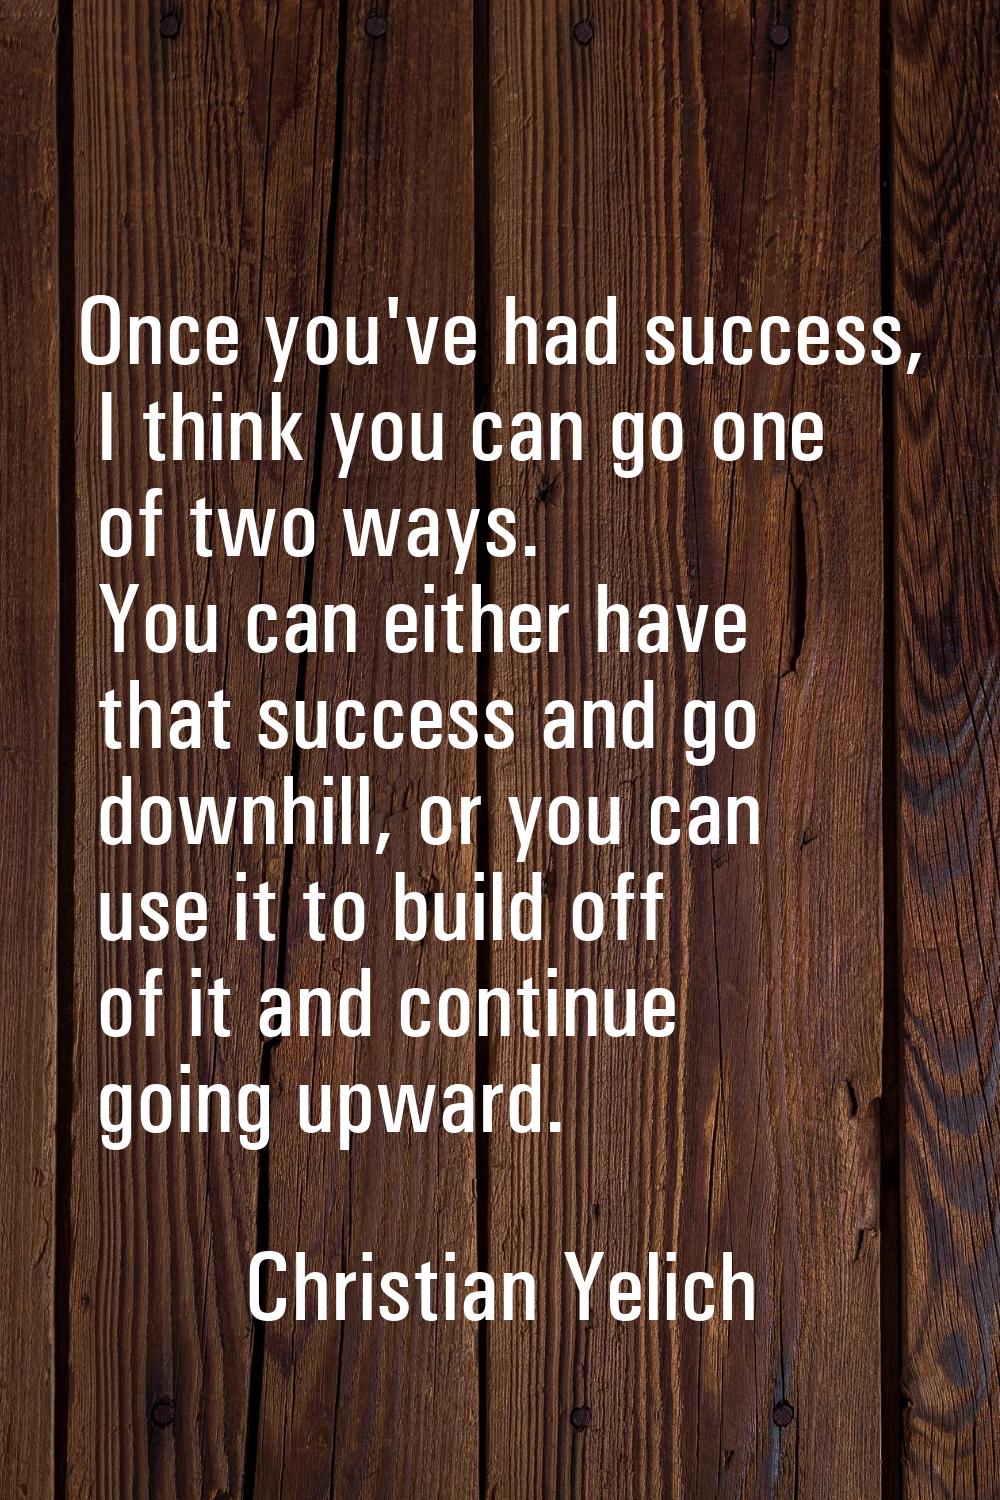 Once you've had success, I think you can go one of two ways. You can either have that success and g